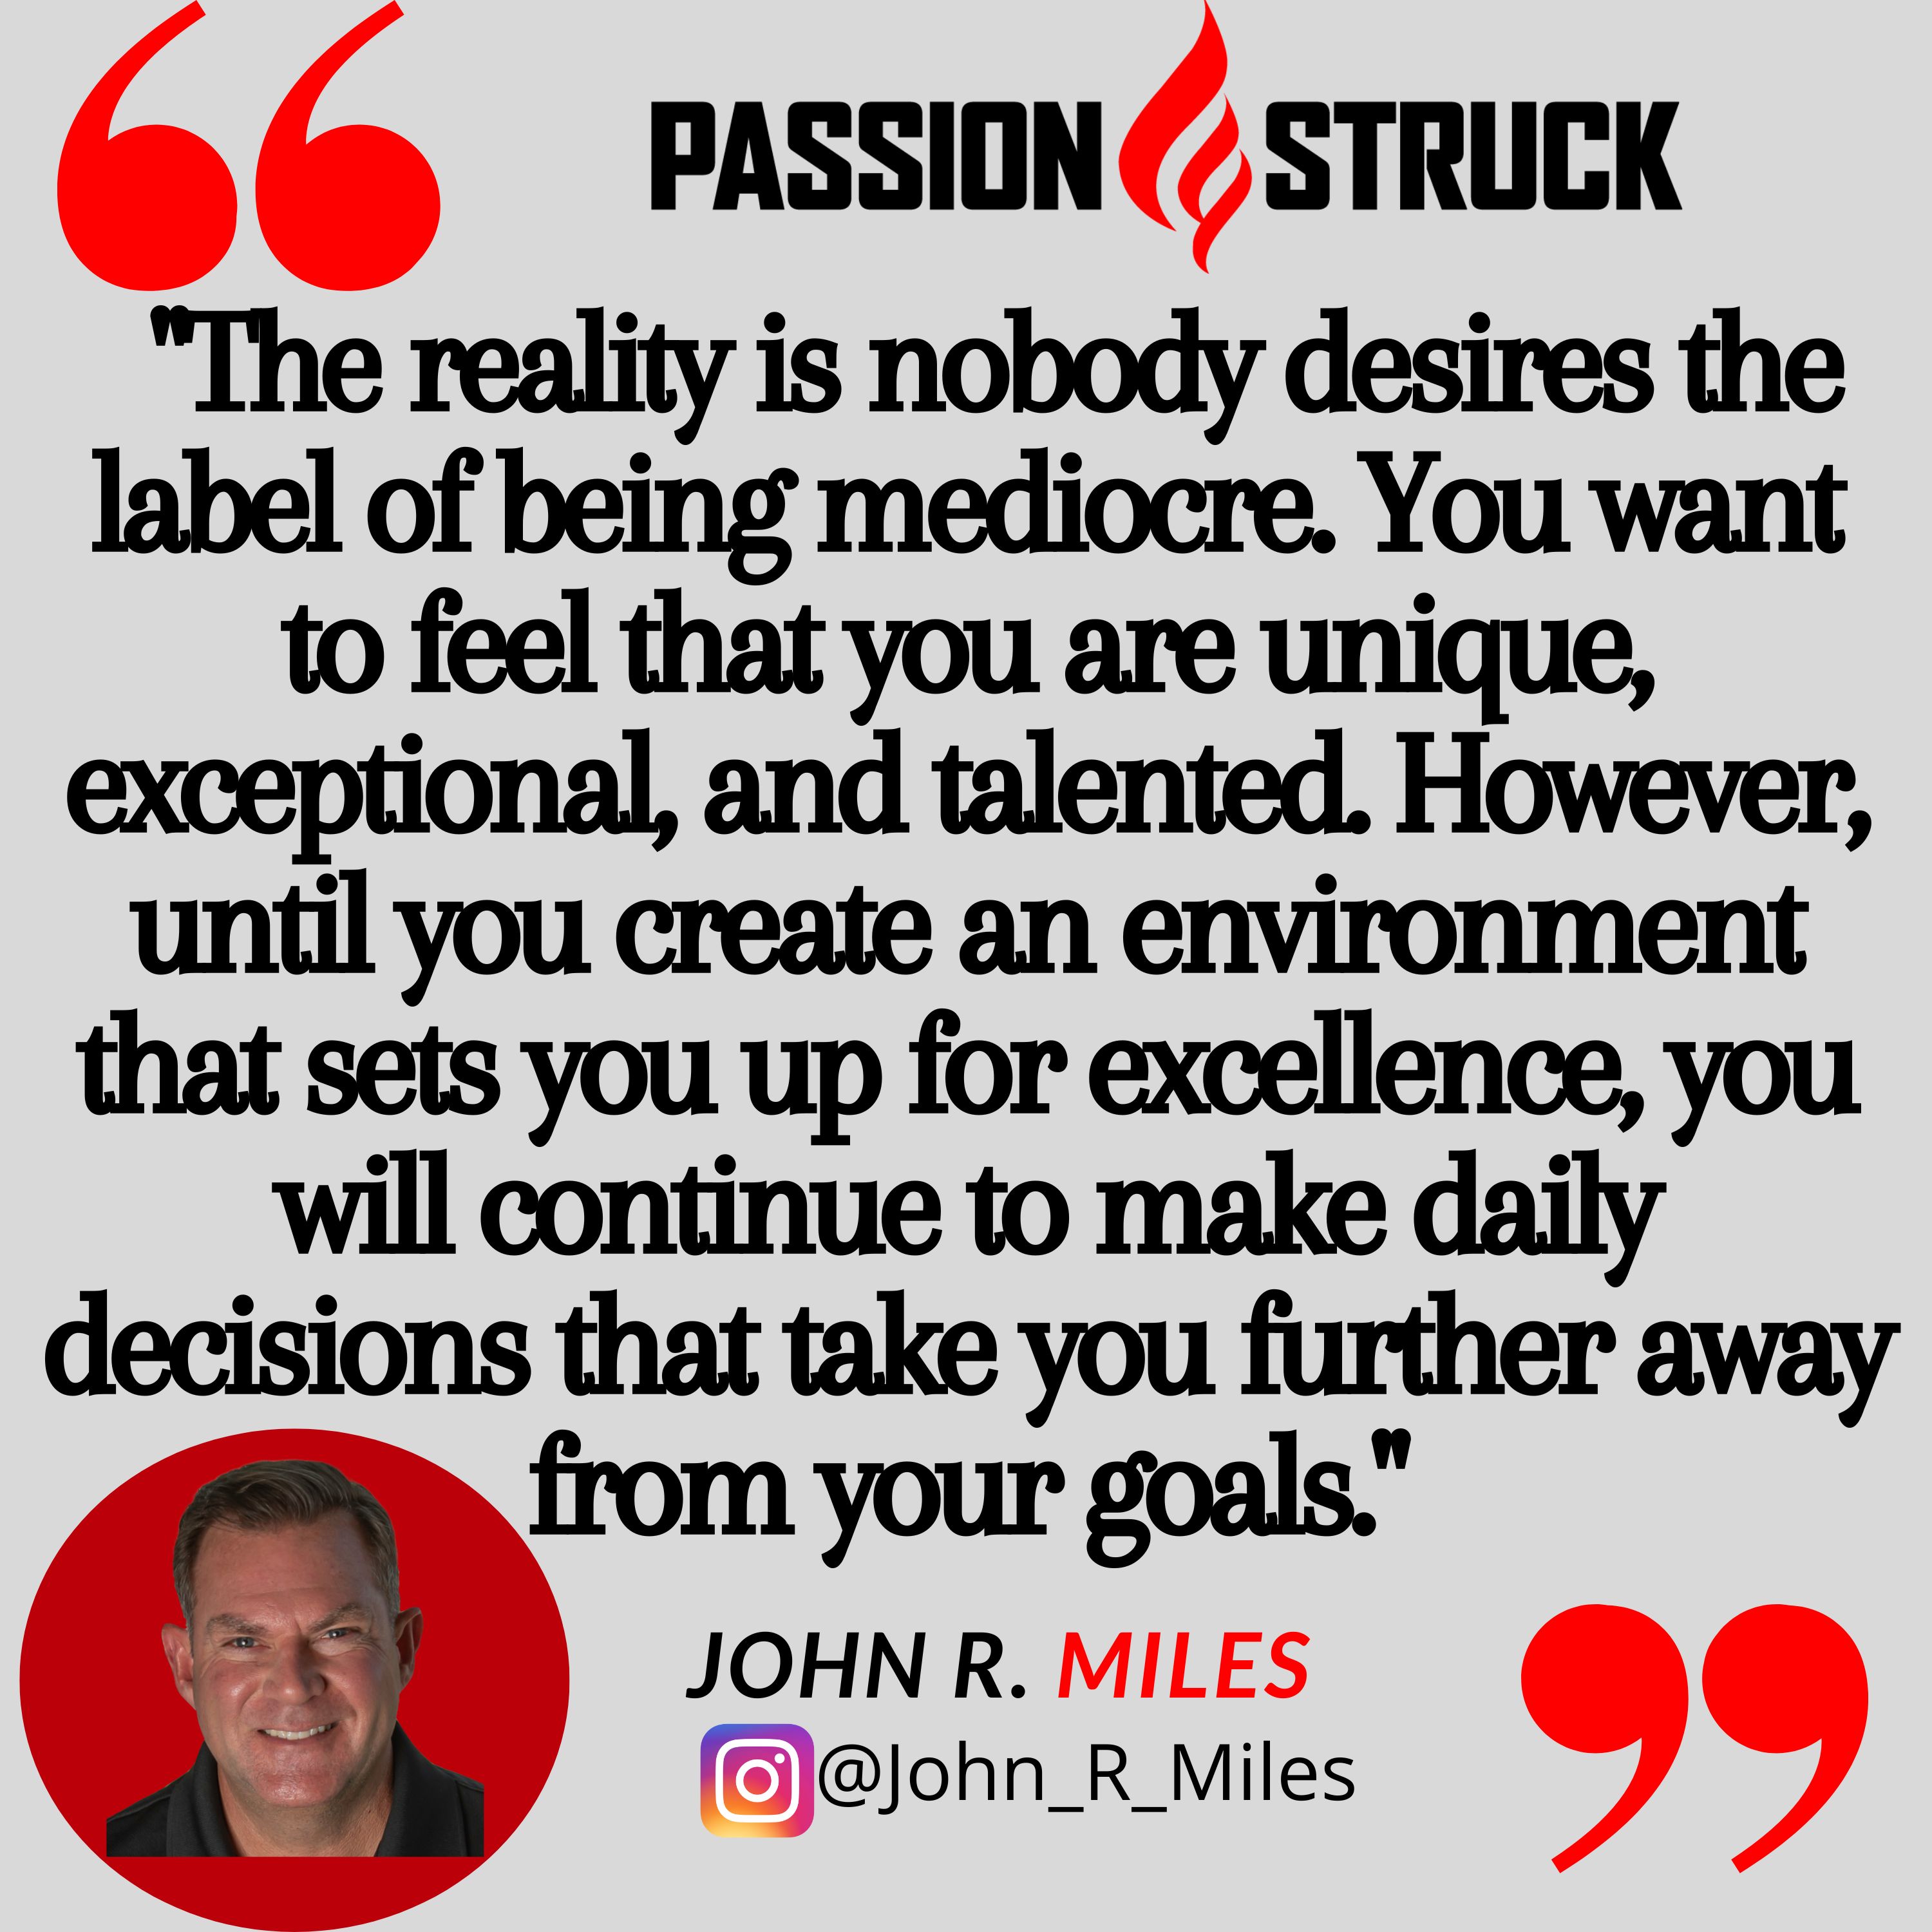 Quote from John R. Miles on being mediocre: "The reality is nobody desires the label of being mediocre. You want to feel that you are unique, exceptional, and talented. However, until you create an environment that sets you up for excellence, you will continue to make daily decisions that take you further away from your goals."